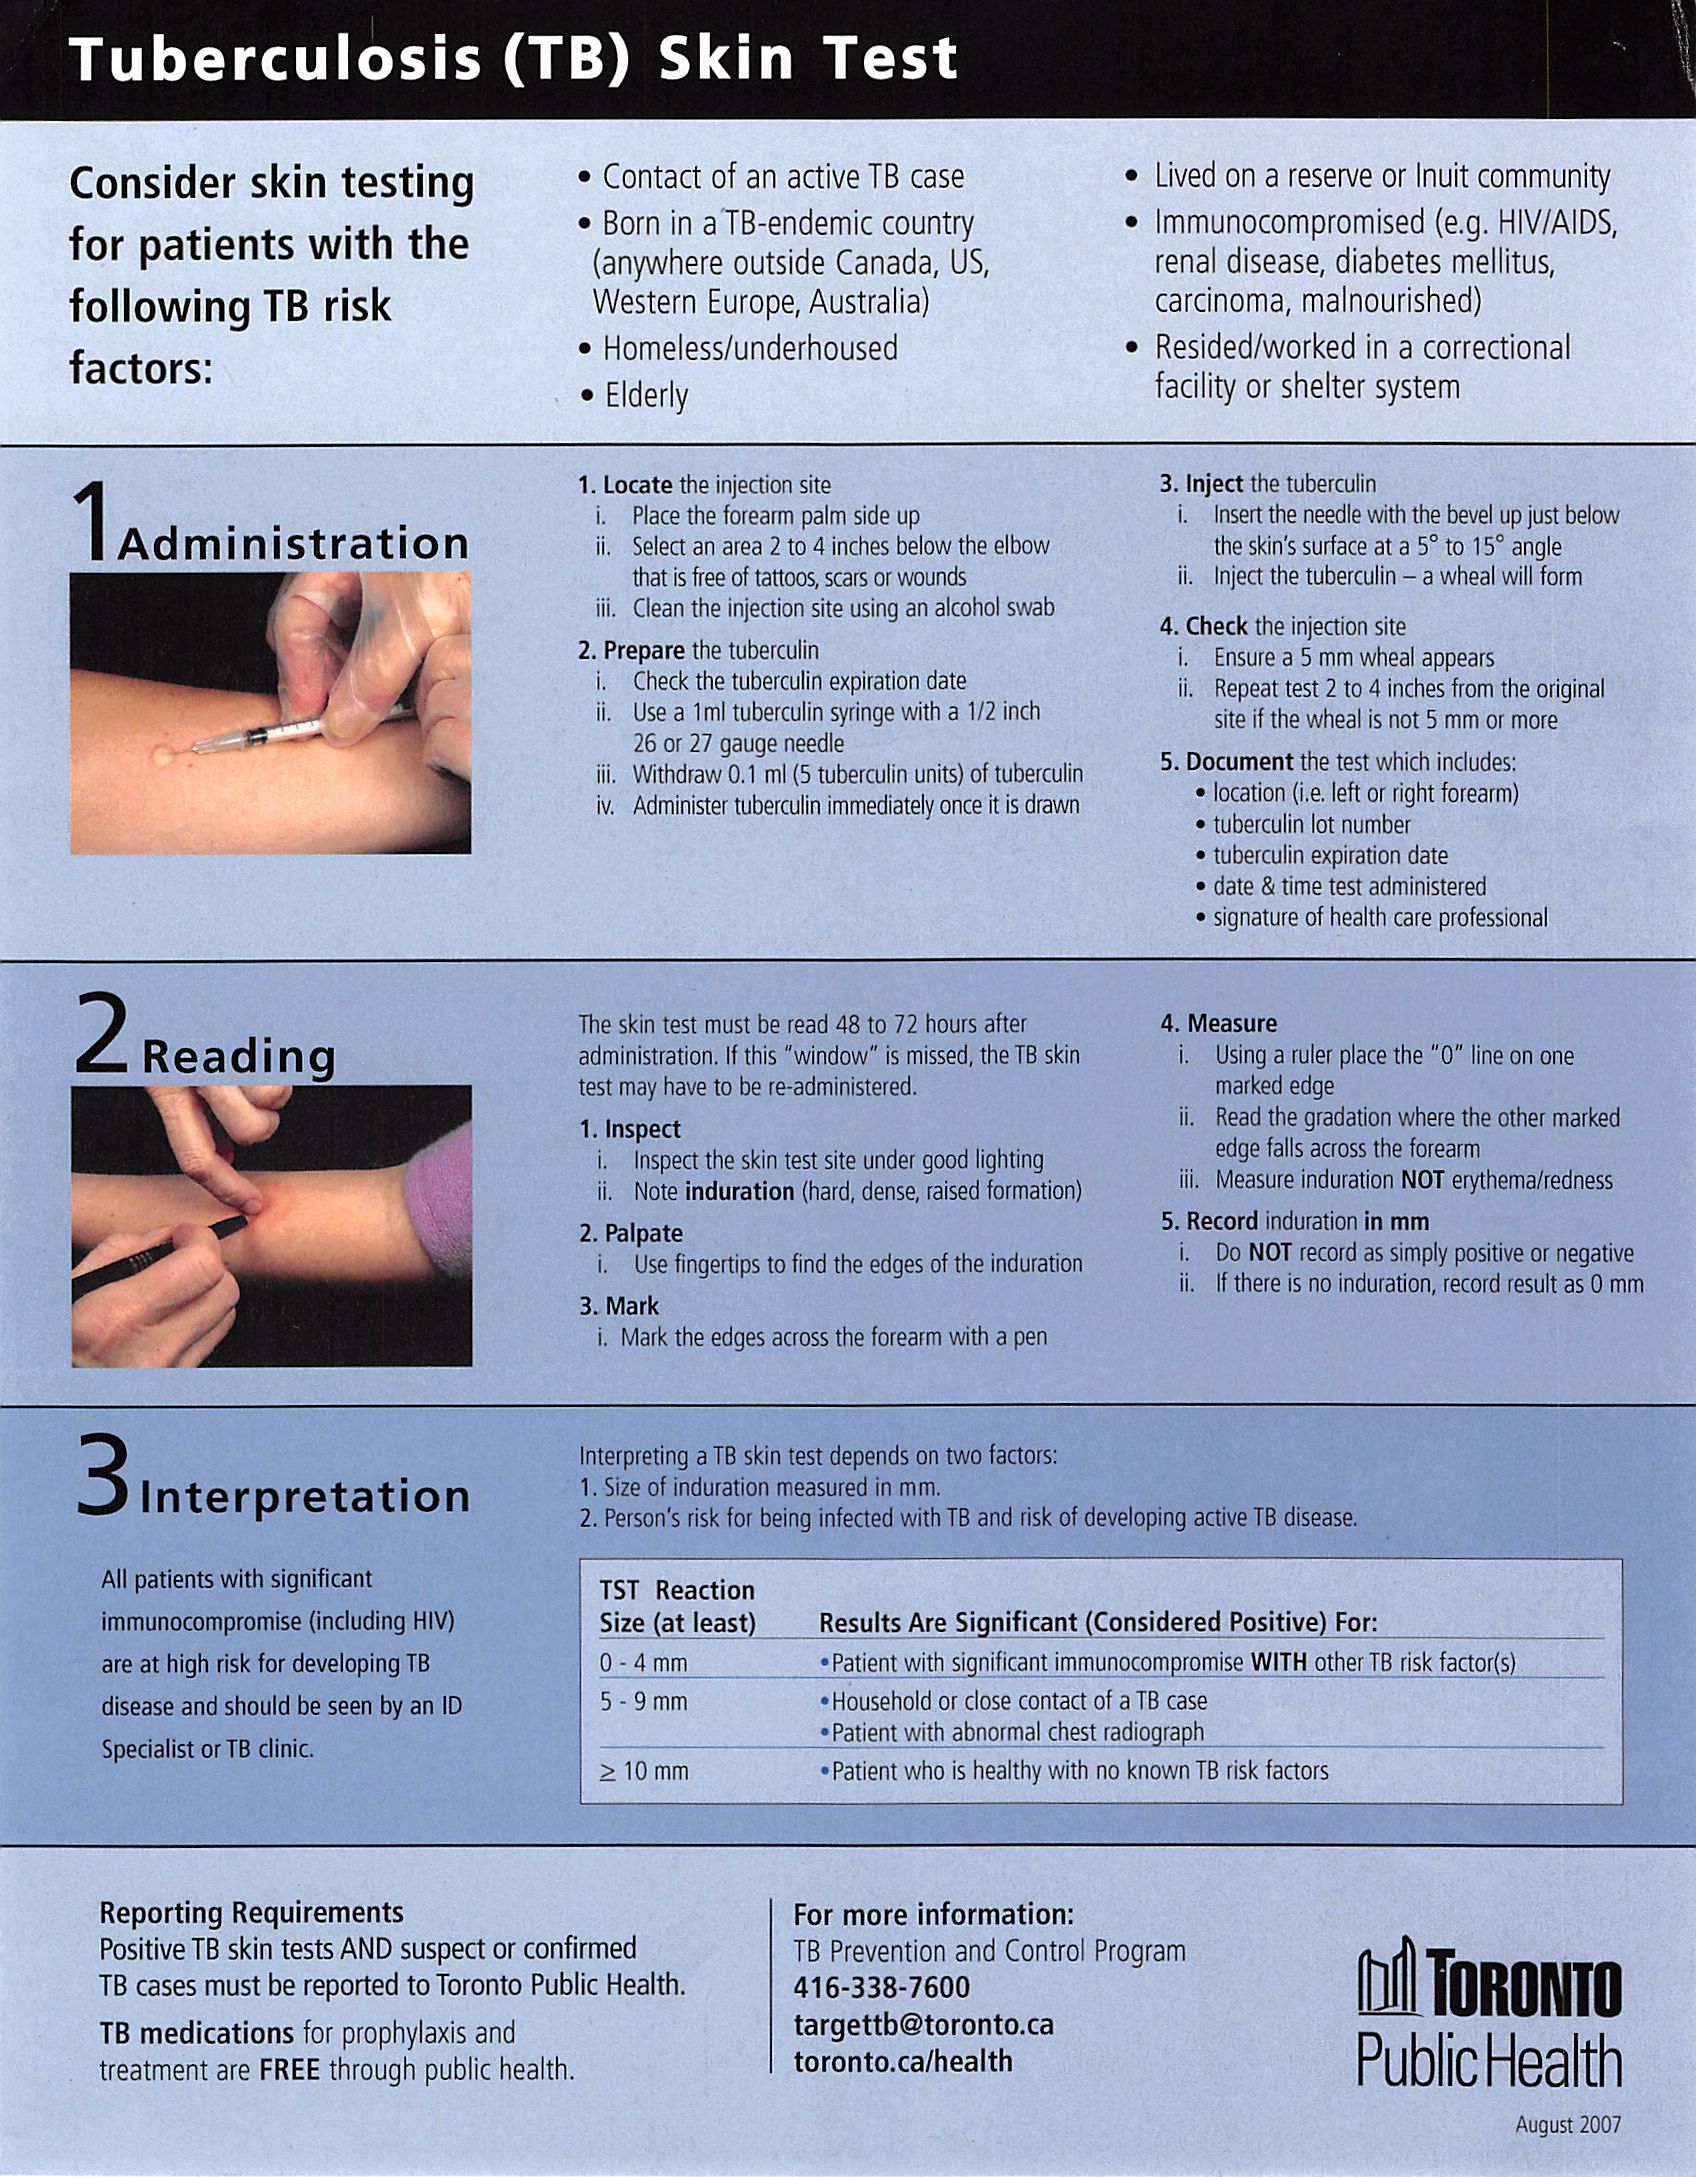 tb-skin-test-instructions-wellone-medical-centre